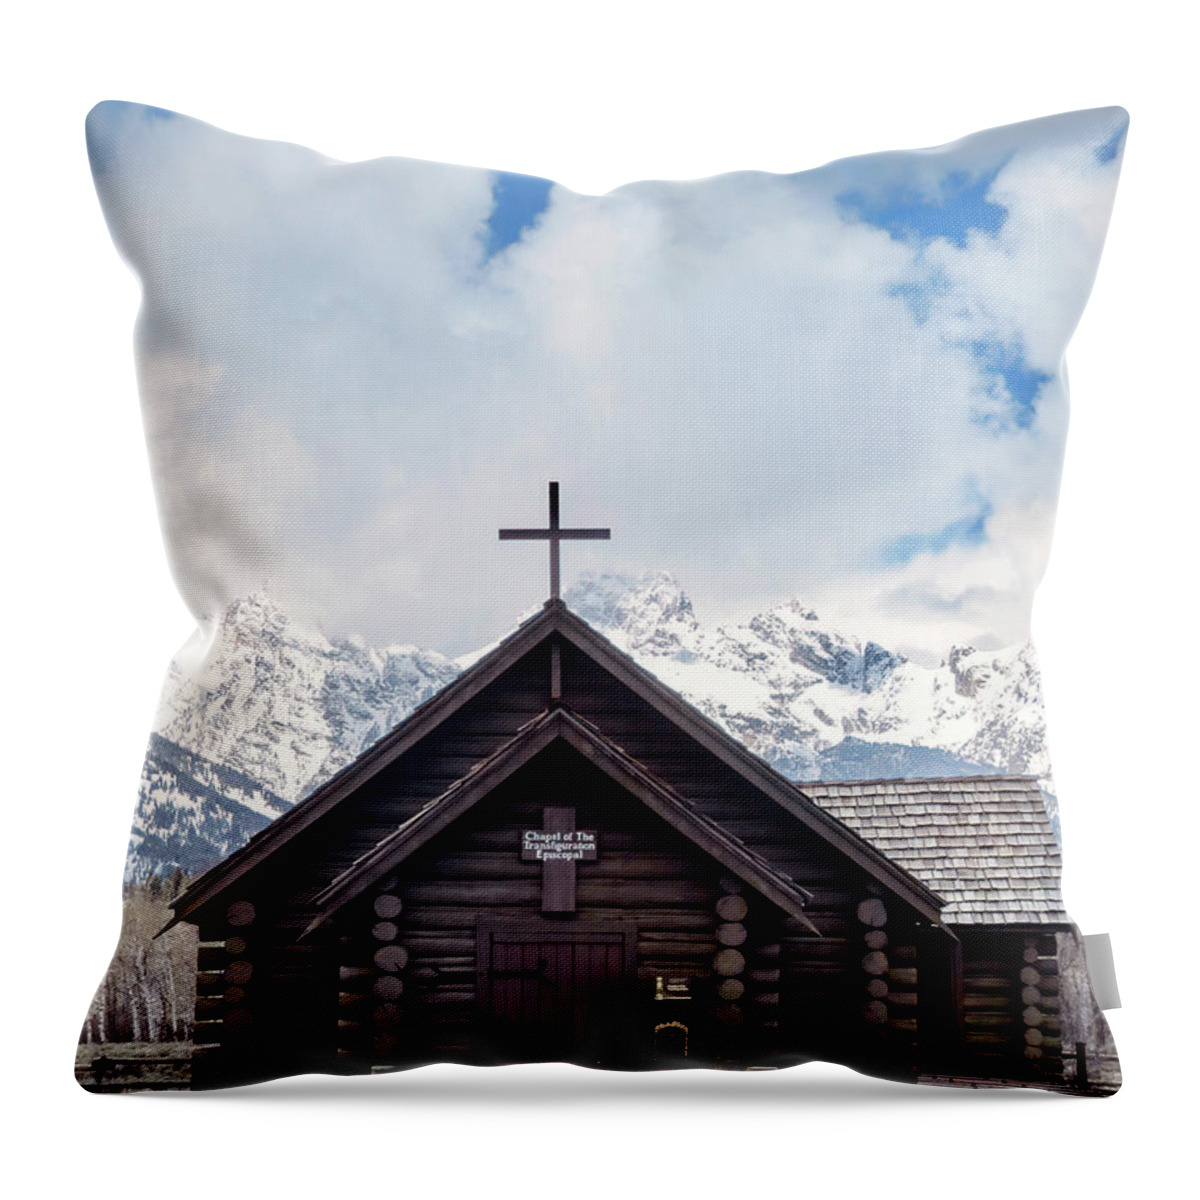 Chapel Of The Transfiguration Throw Pillow featuring the photograph A Little Chapel by Rachel Morrison